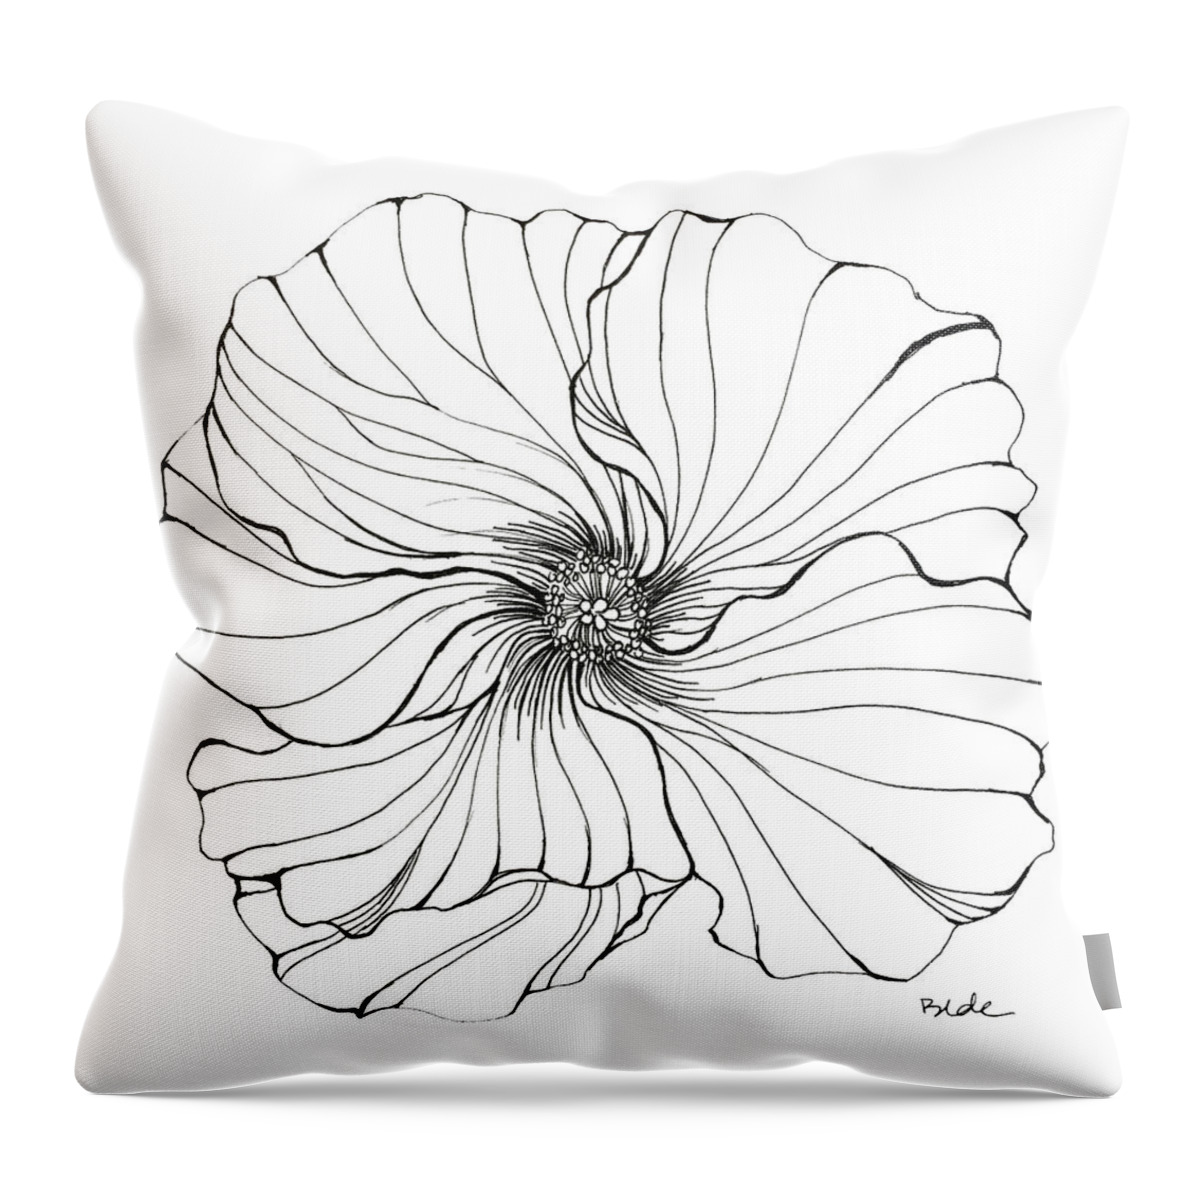 Hibiscus Pen Drawing Black White Vellum Kauai Hawaii Throw Pillow featuring the drawing Hibiscus by Catherine Bede